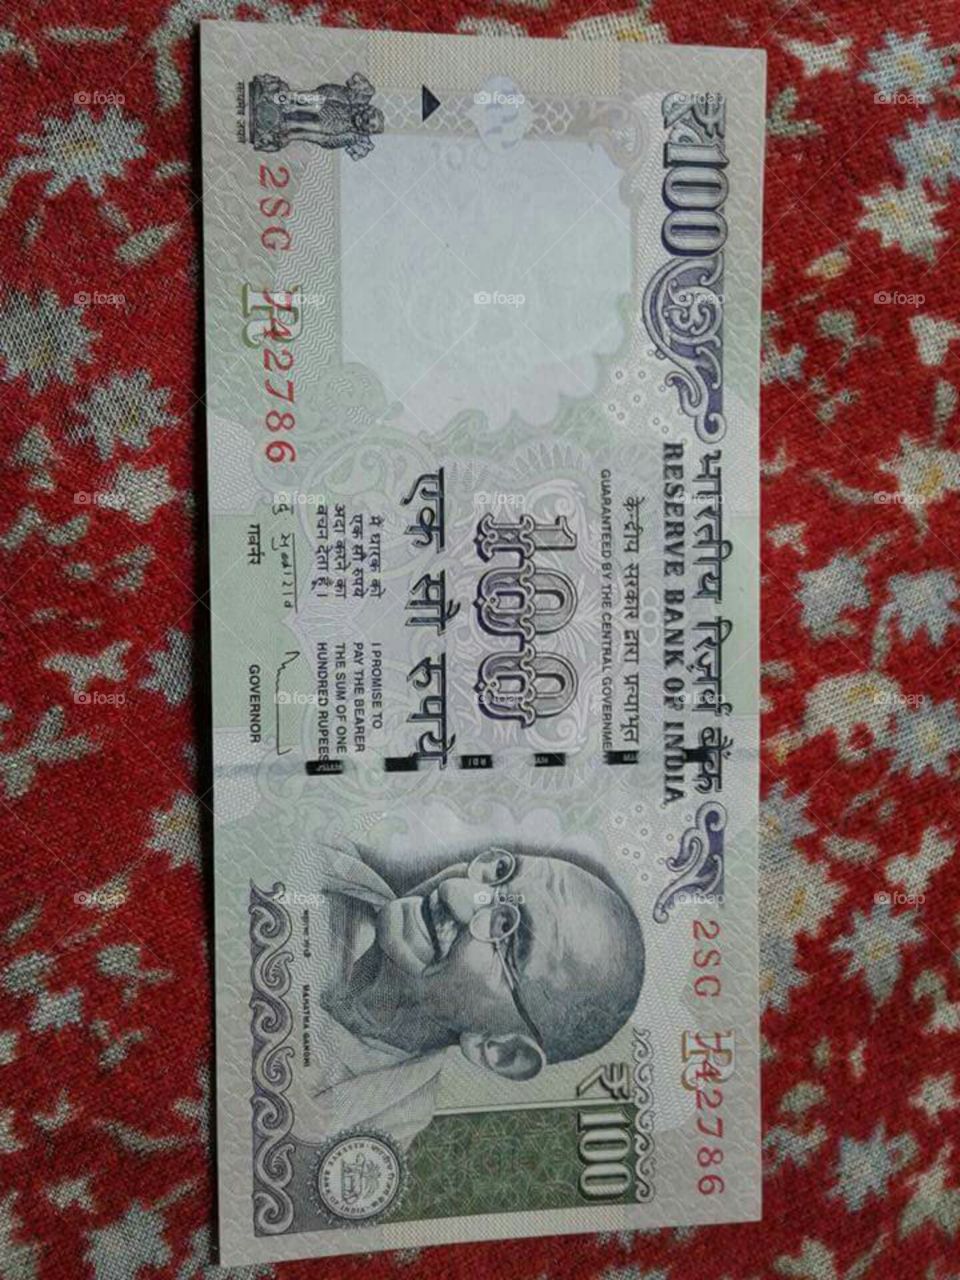 100 rupees note number 786